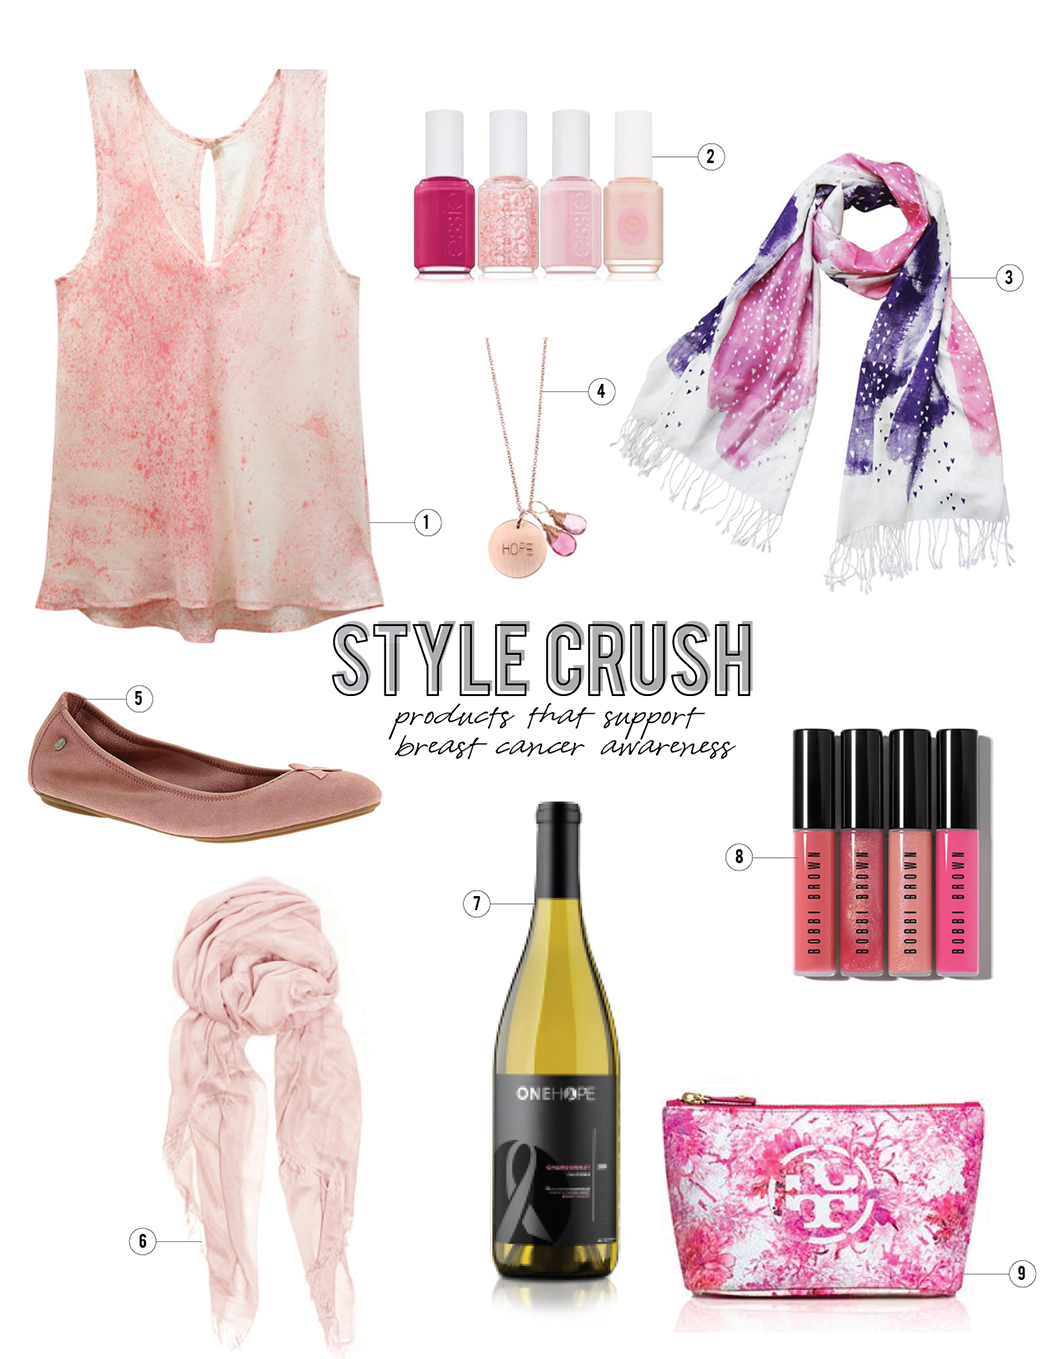 Style Crush – Products that support breast cancer awareness